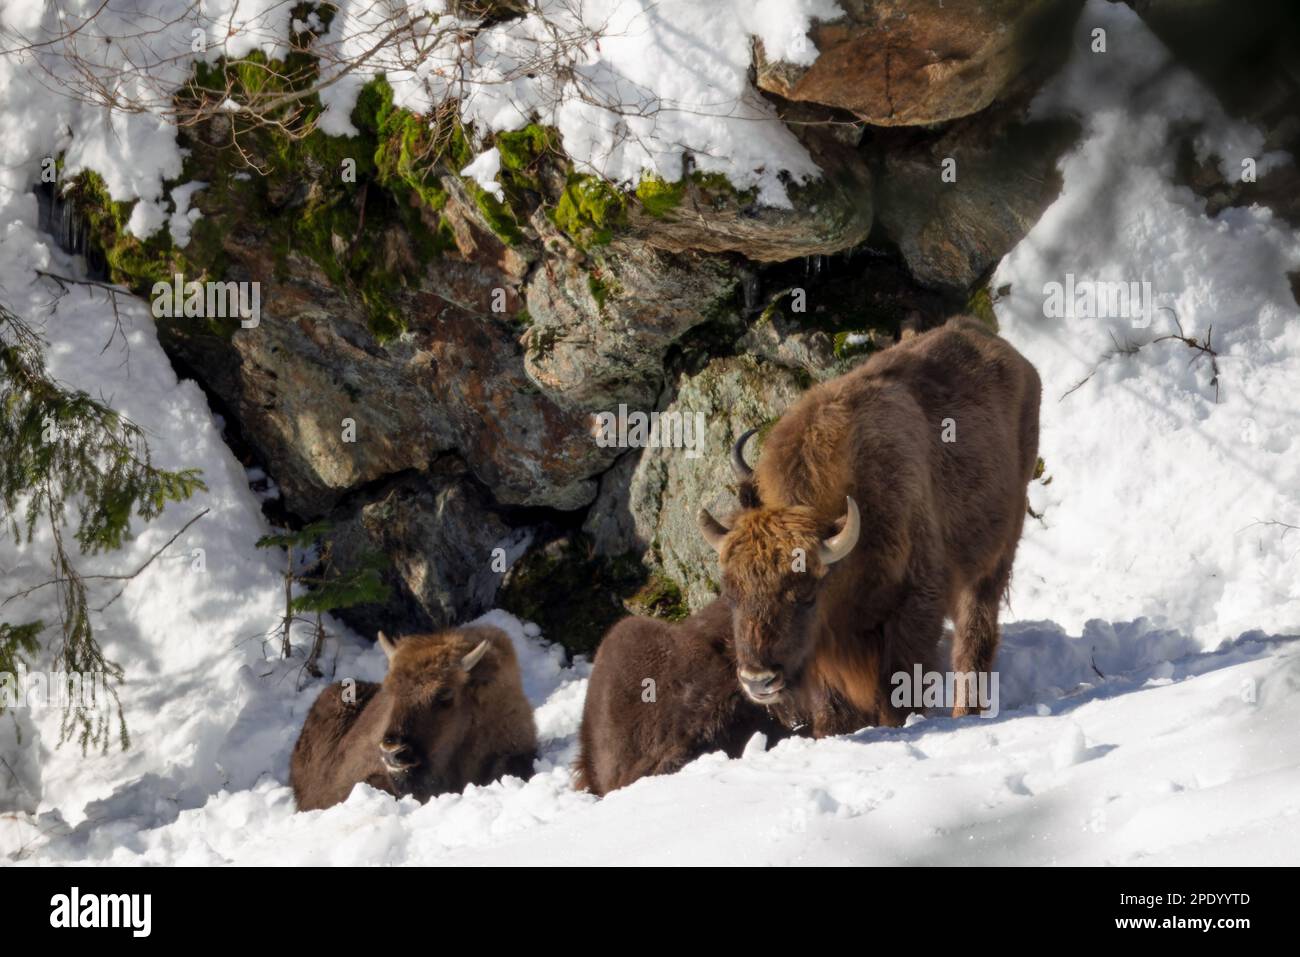 European bison (Bison bonasus) in the snow in the Bavarian Forest National Park, Bavaria, Germany. Stock Photo